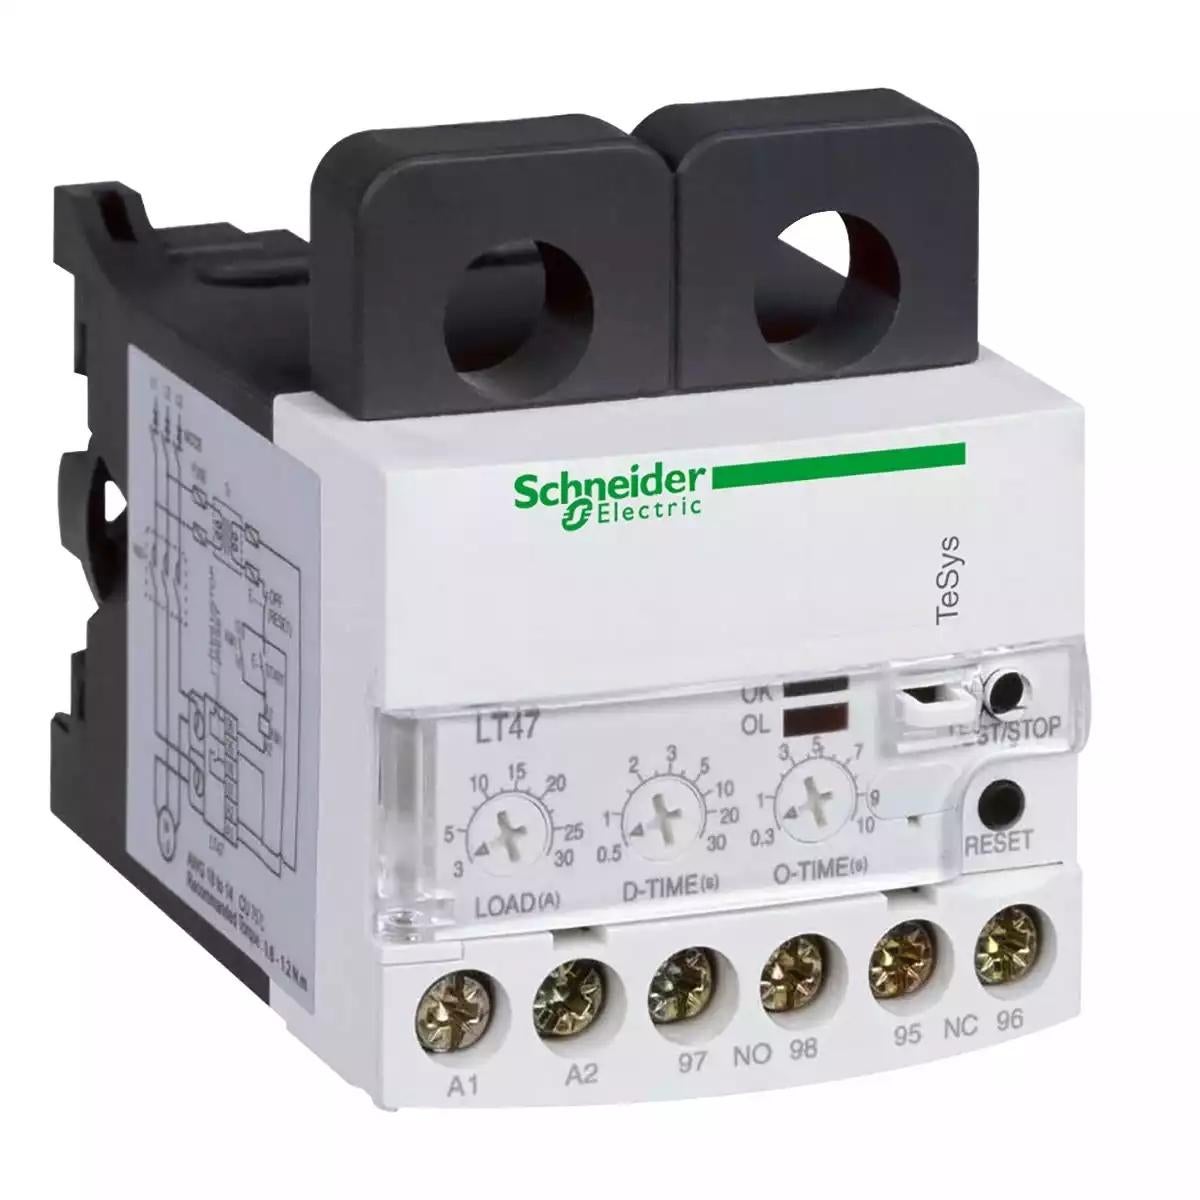 Schneider Electric TeSys LT47 electronic over current relays-automatic- 3...30 A - 100...120 V AC